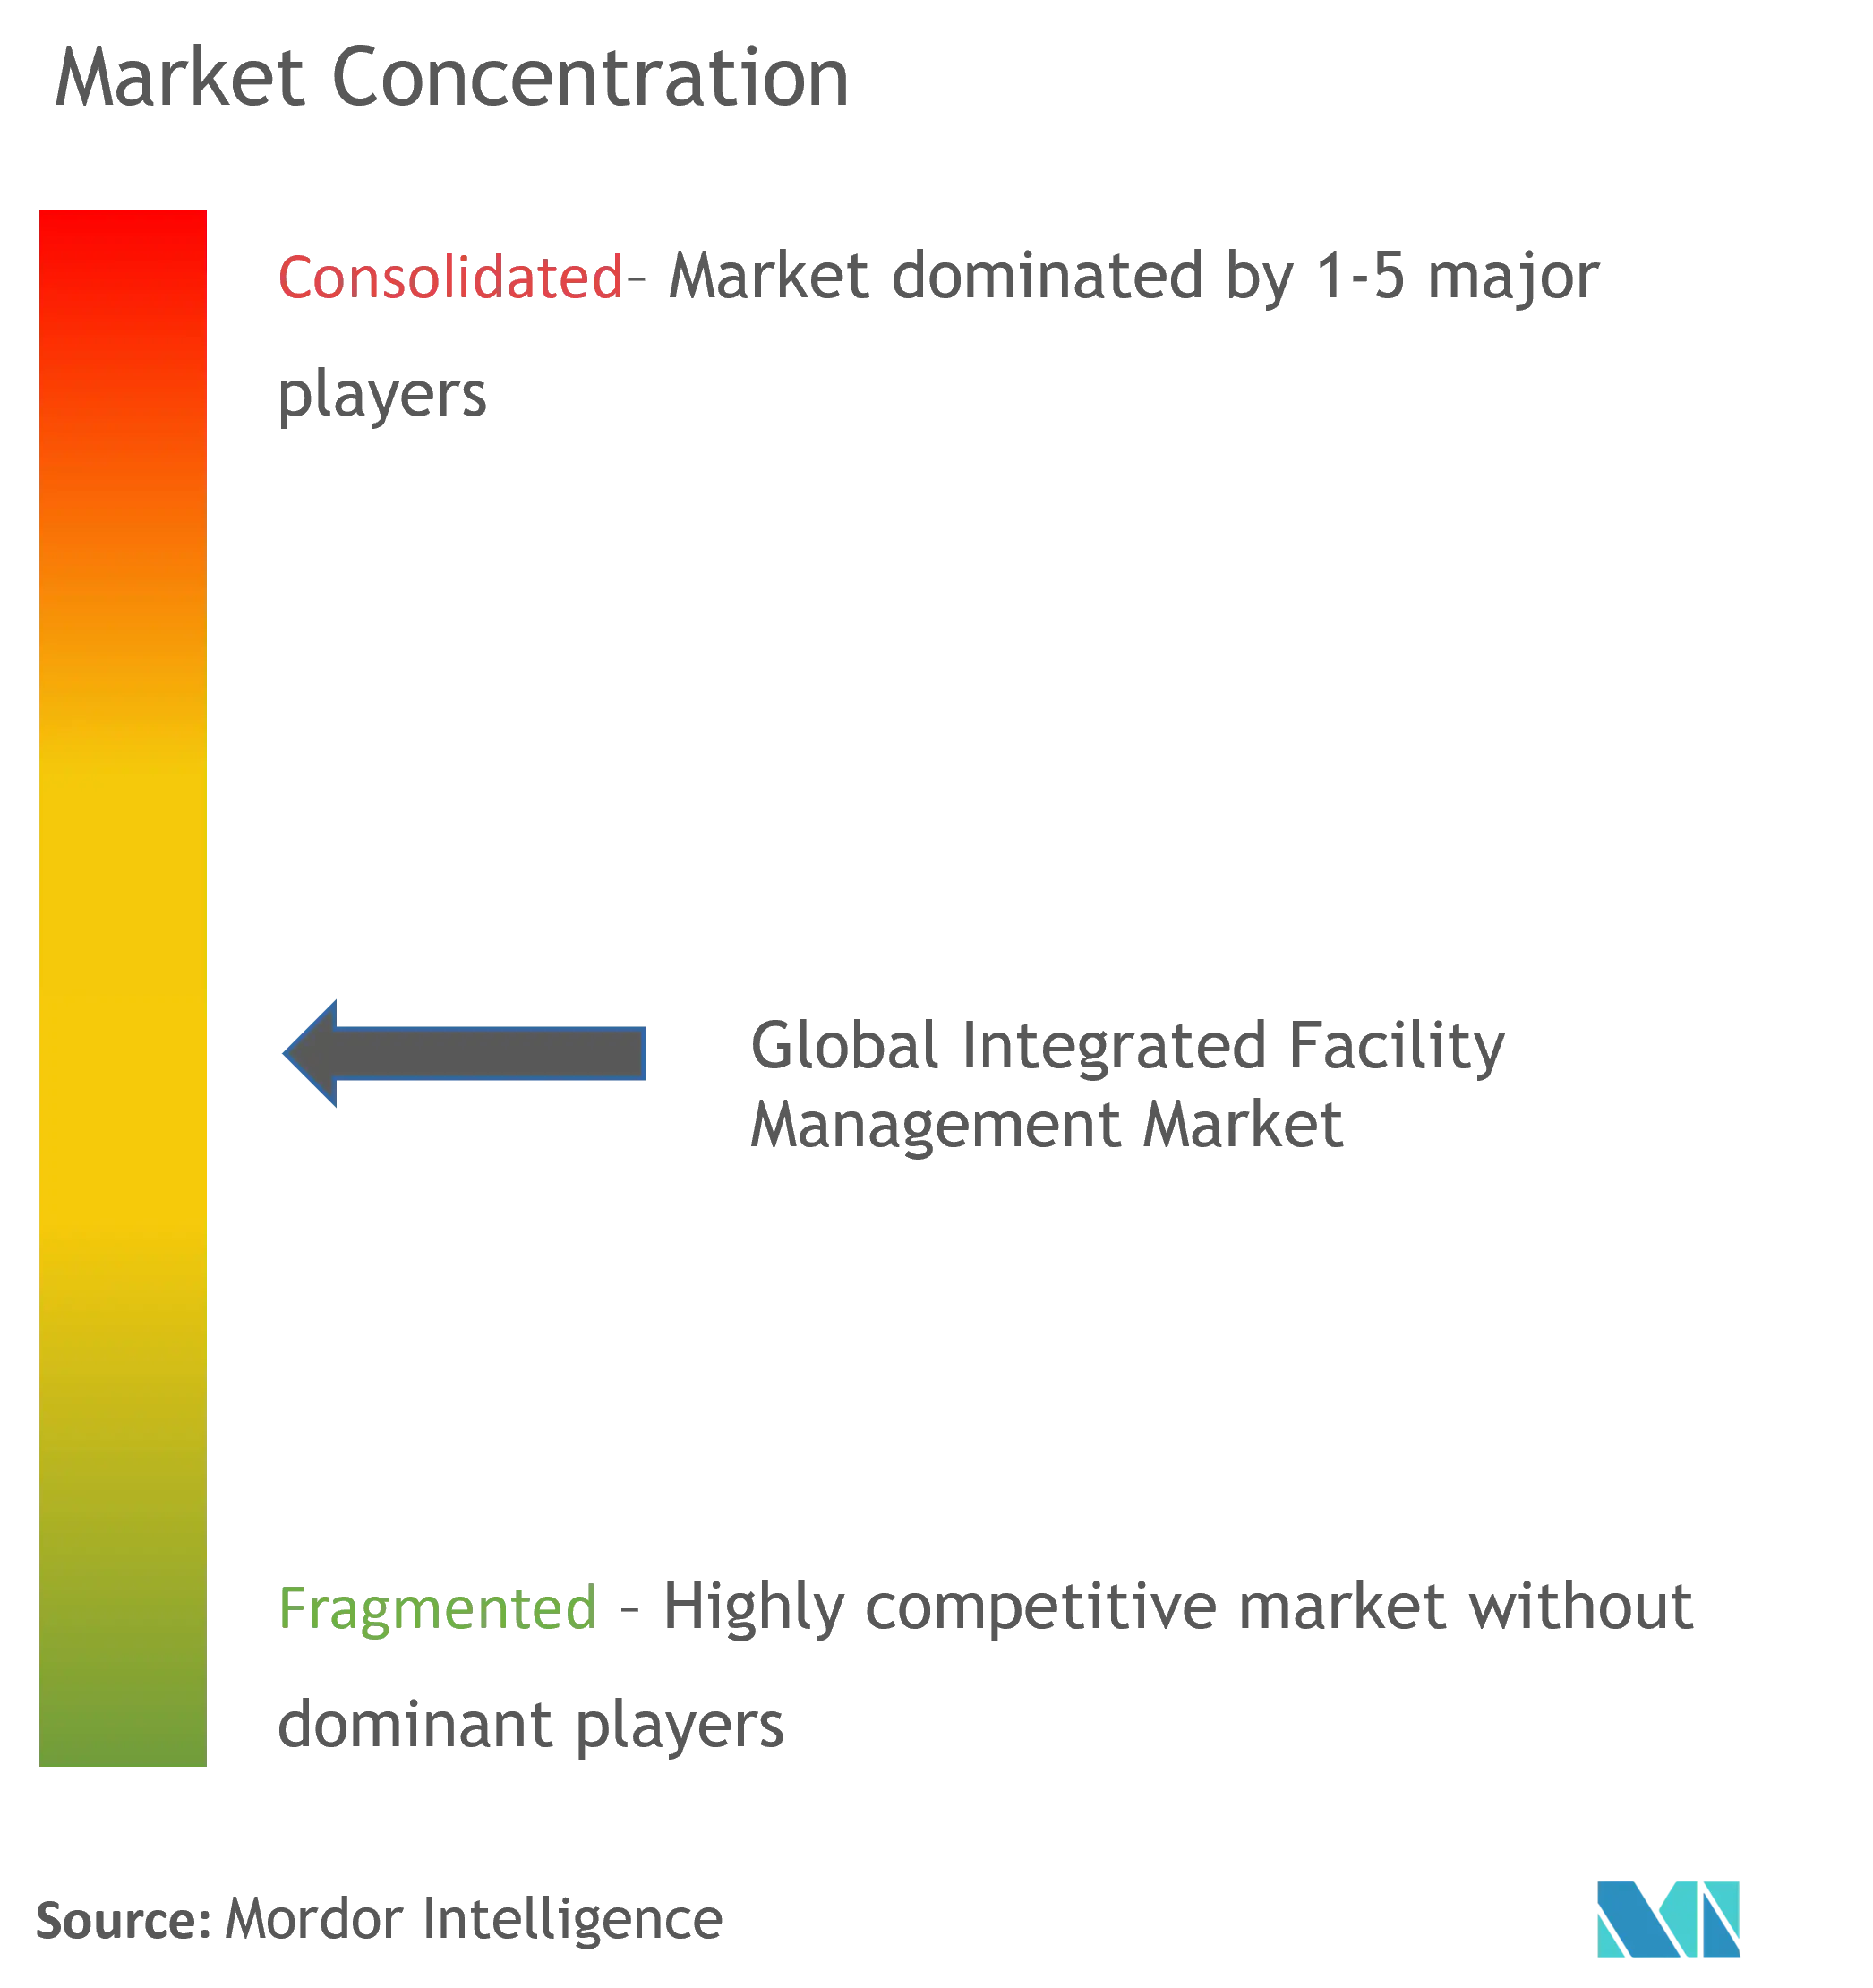 Integrated Facility Management Market Concentration